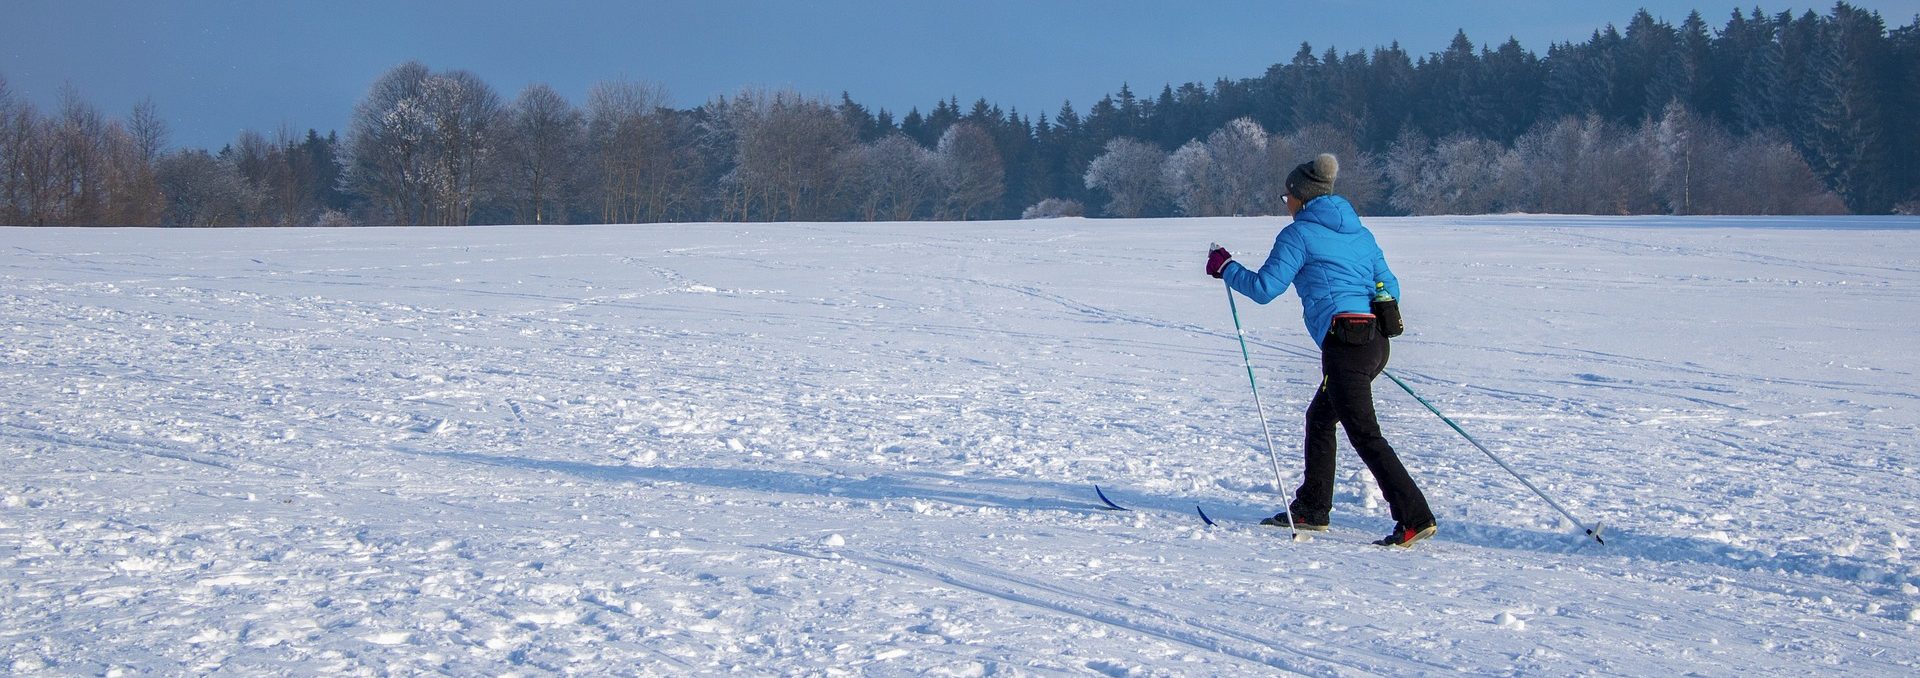 Cross country skiing on a Canadian Land Access land/property